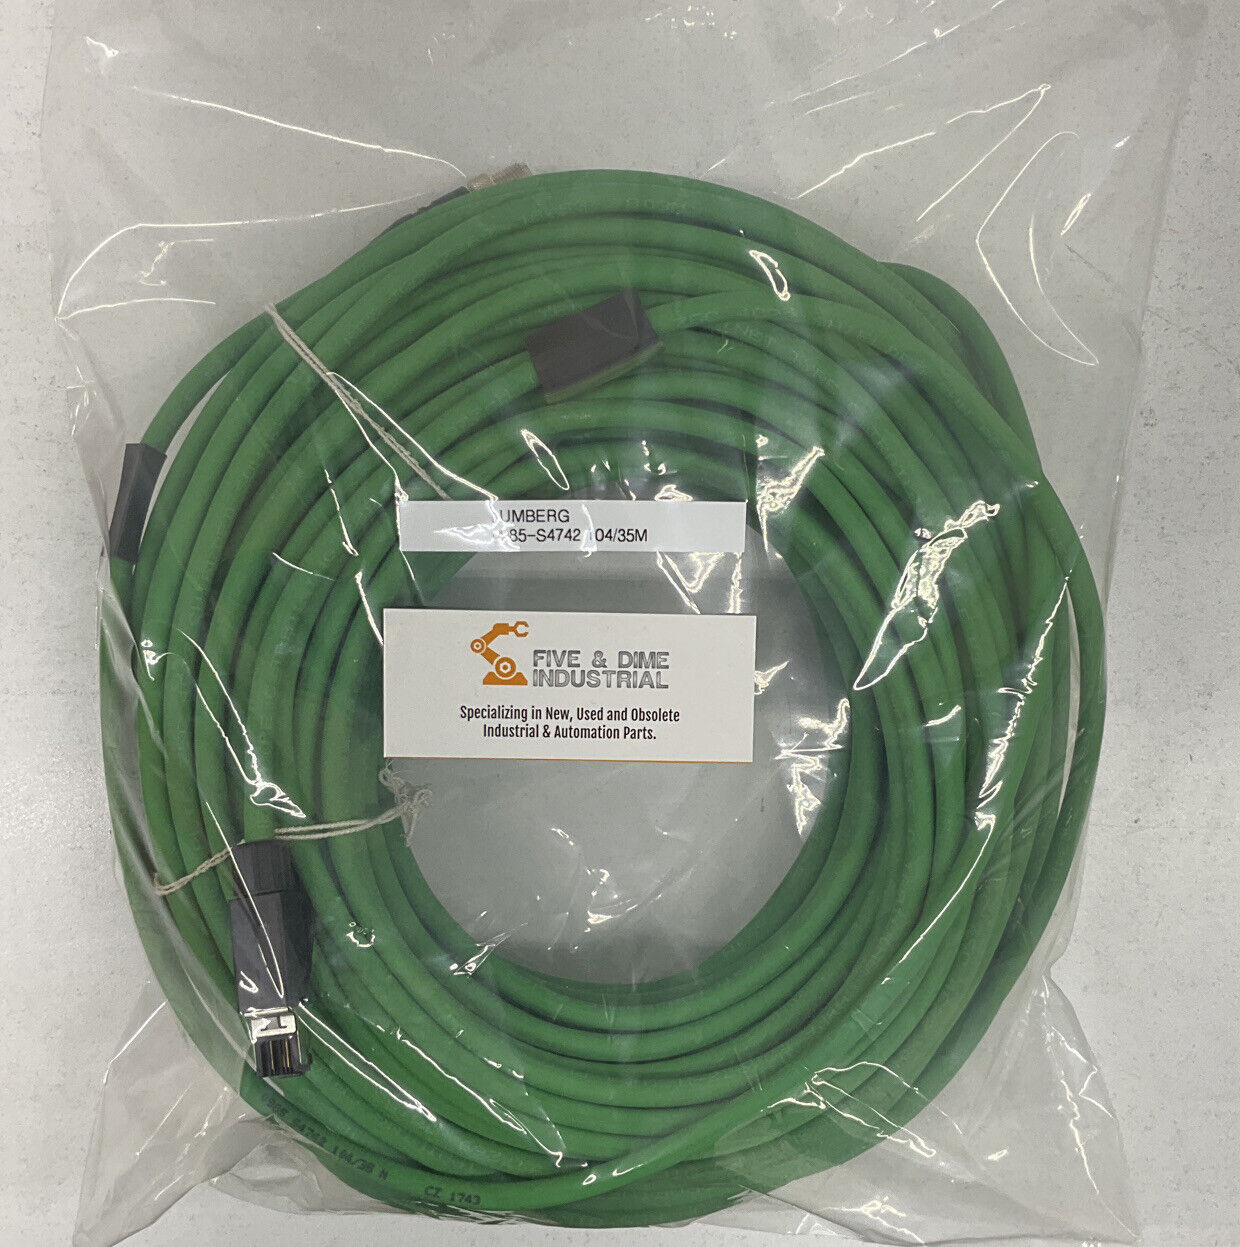 Lumberg 0985-S4742 New ETHERNET CABLE 104/35M (CBL122)